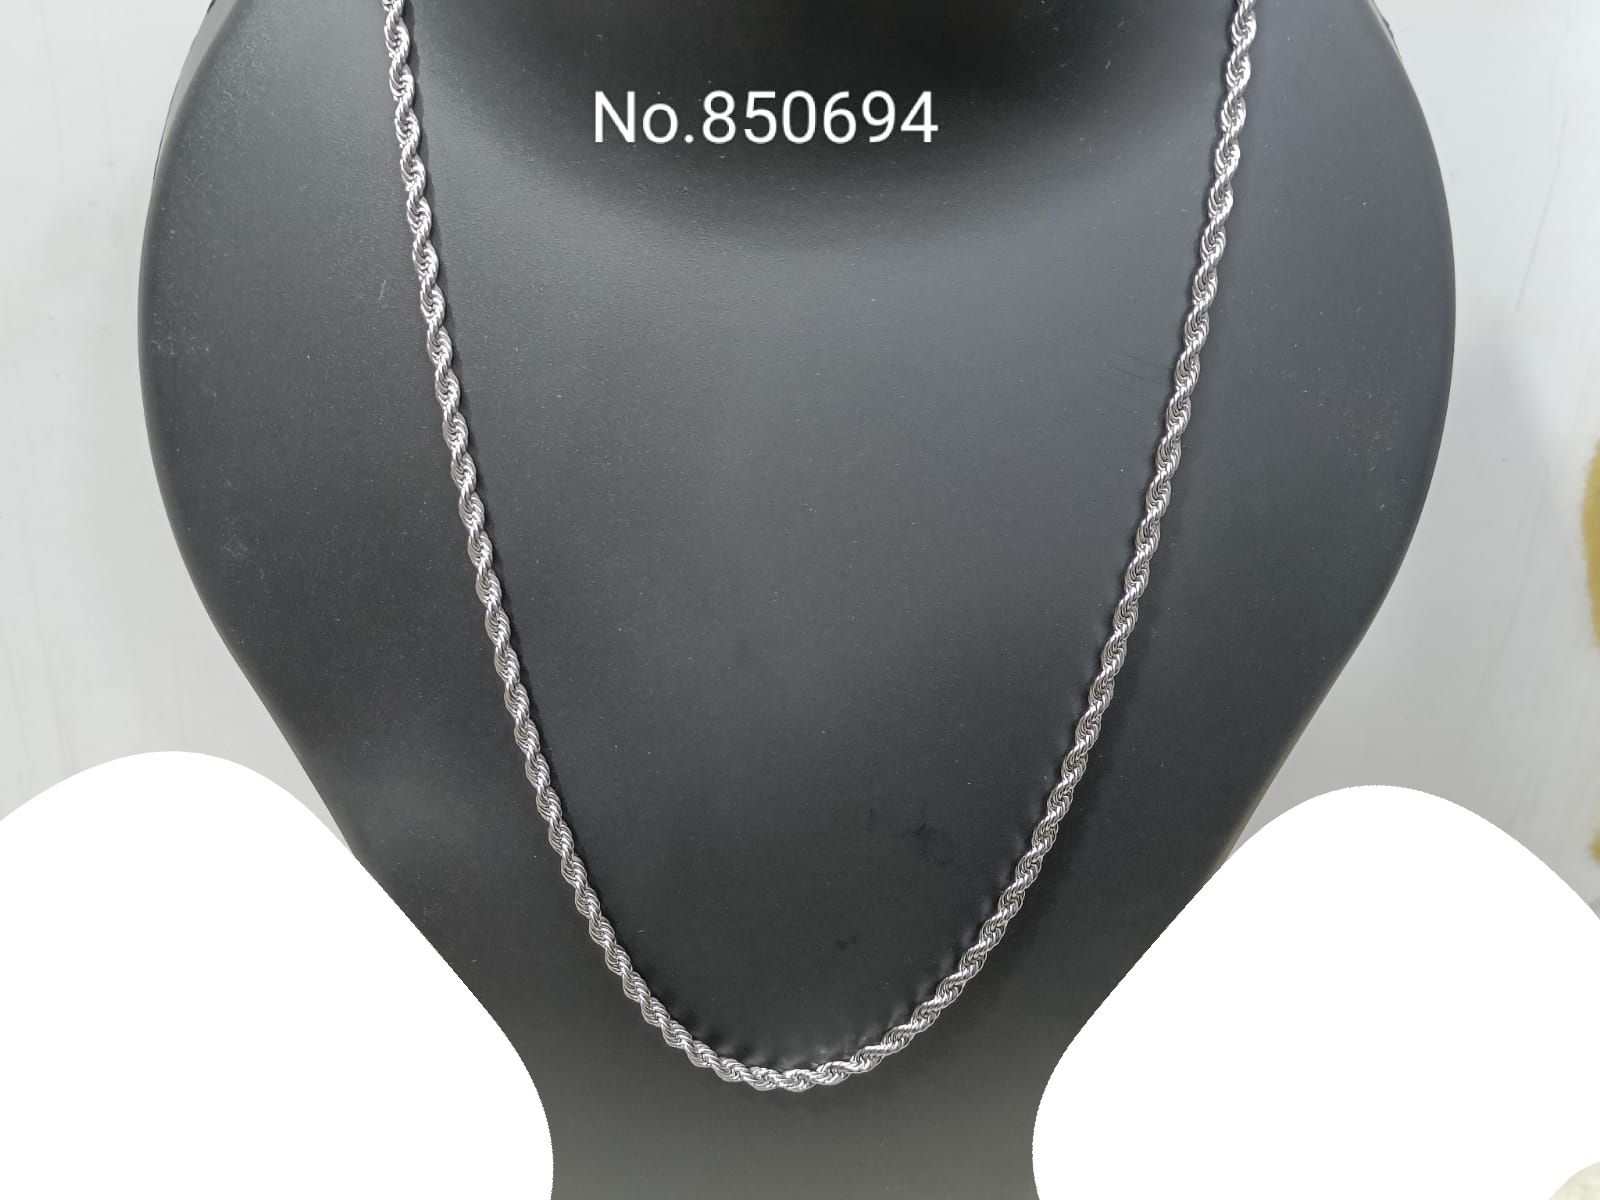 Elfasio 6mm Curb Link Chain Necklace Miami Stainless Steel India | Ubuy